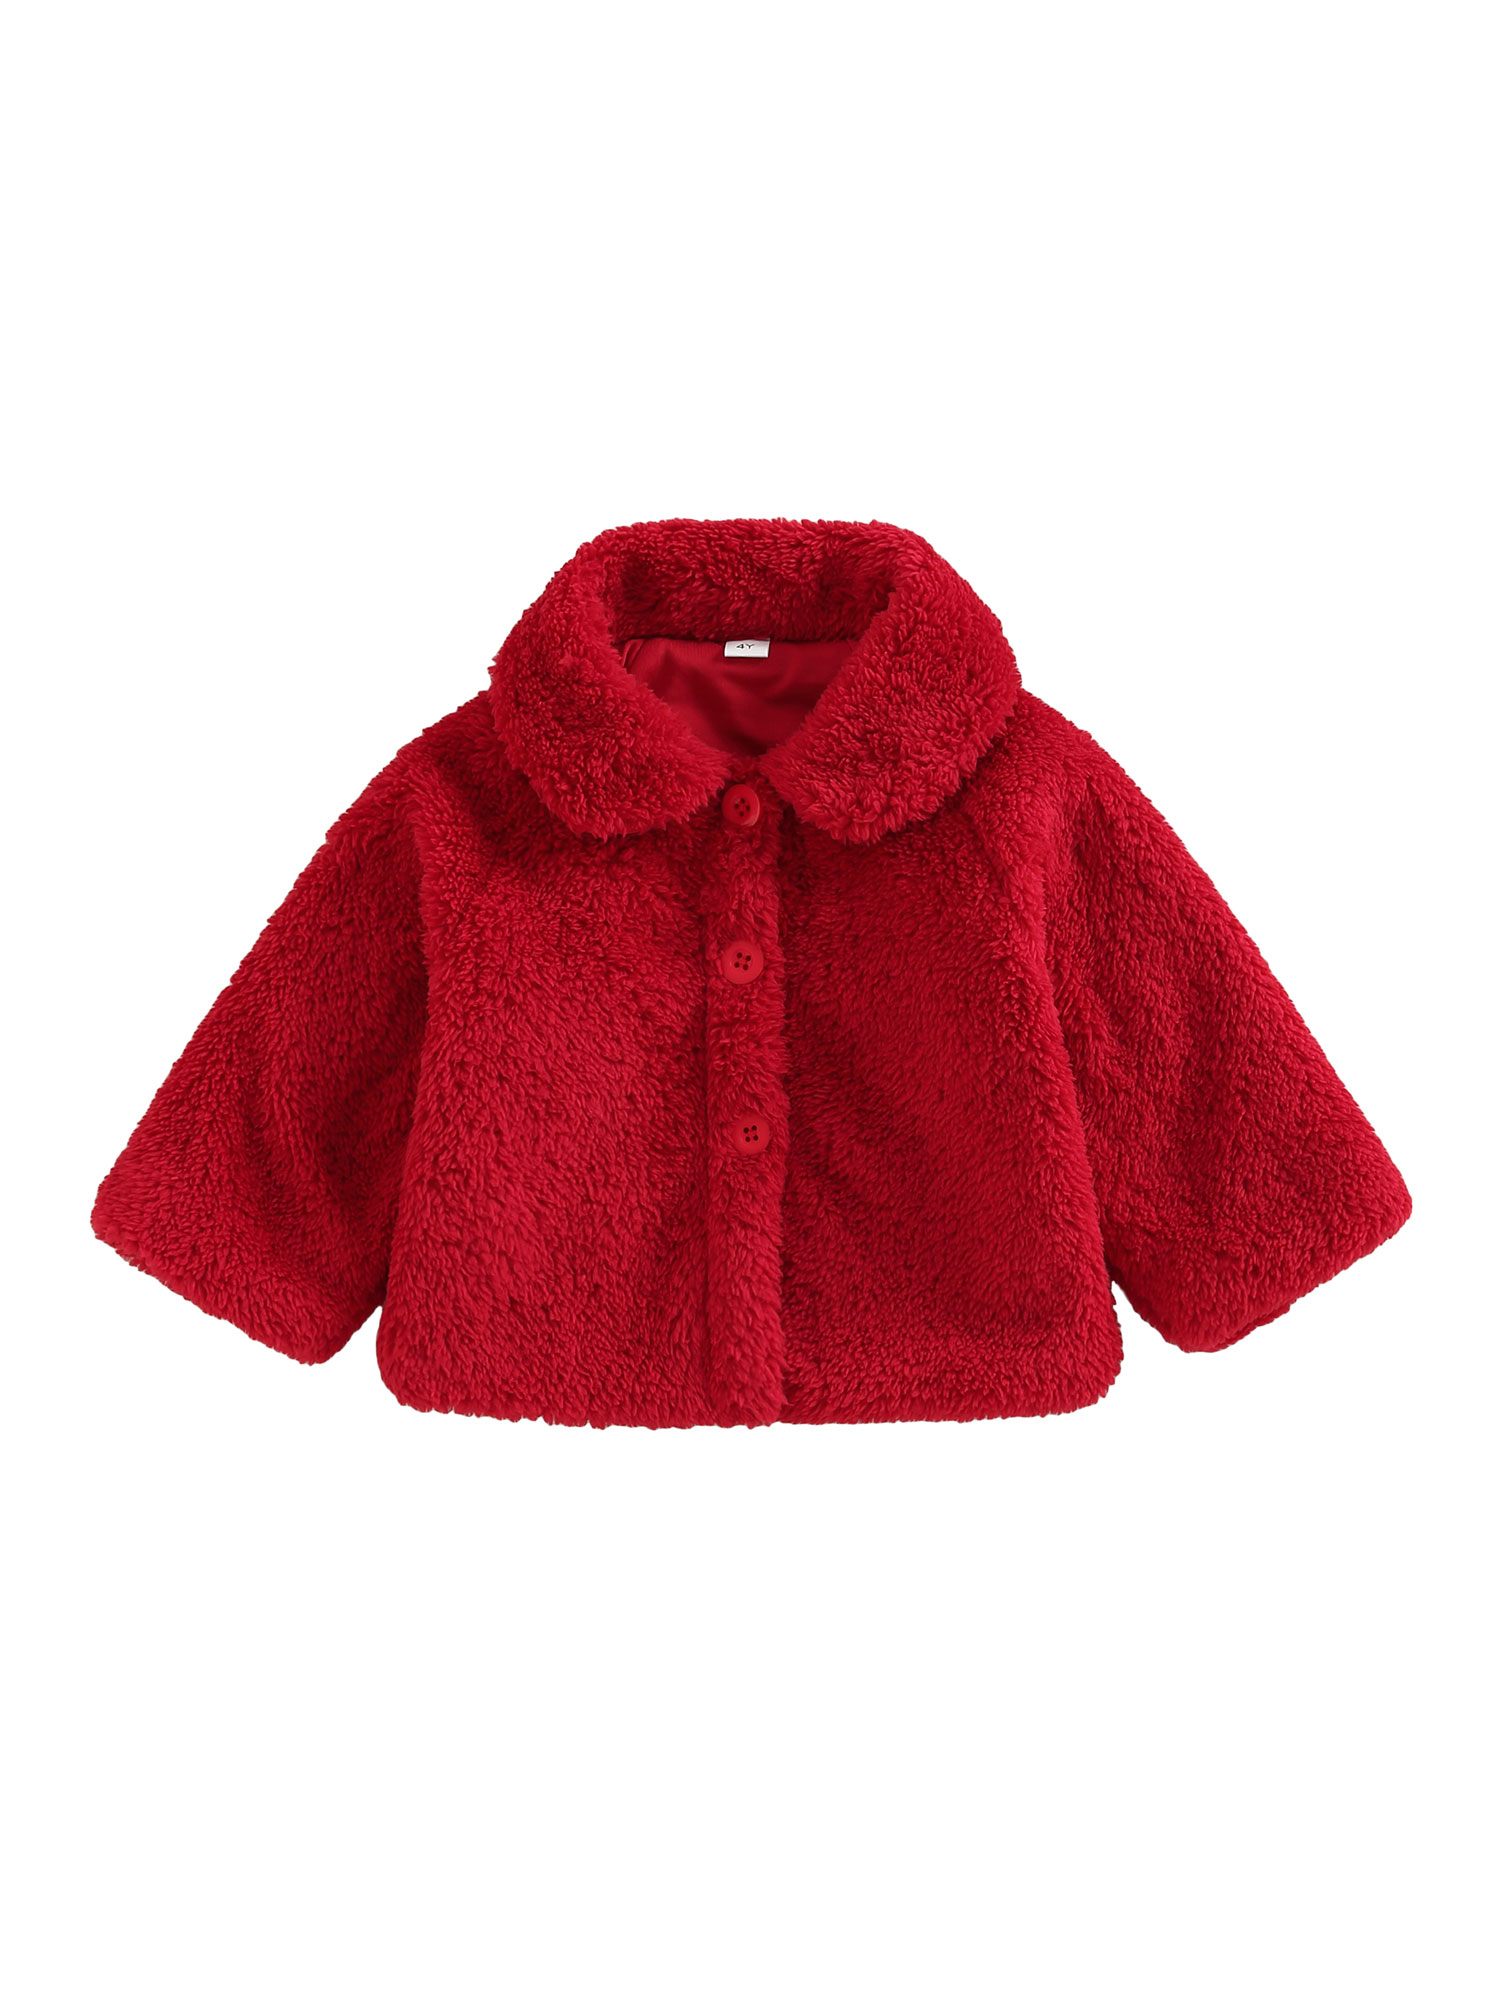 Toddler Baby Girl Plush Coat Warm Red Lapel Long Sleeve Button Down Plush Jacket Winter Outwear - image 1 of 1